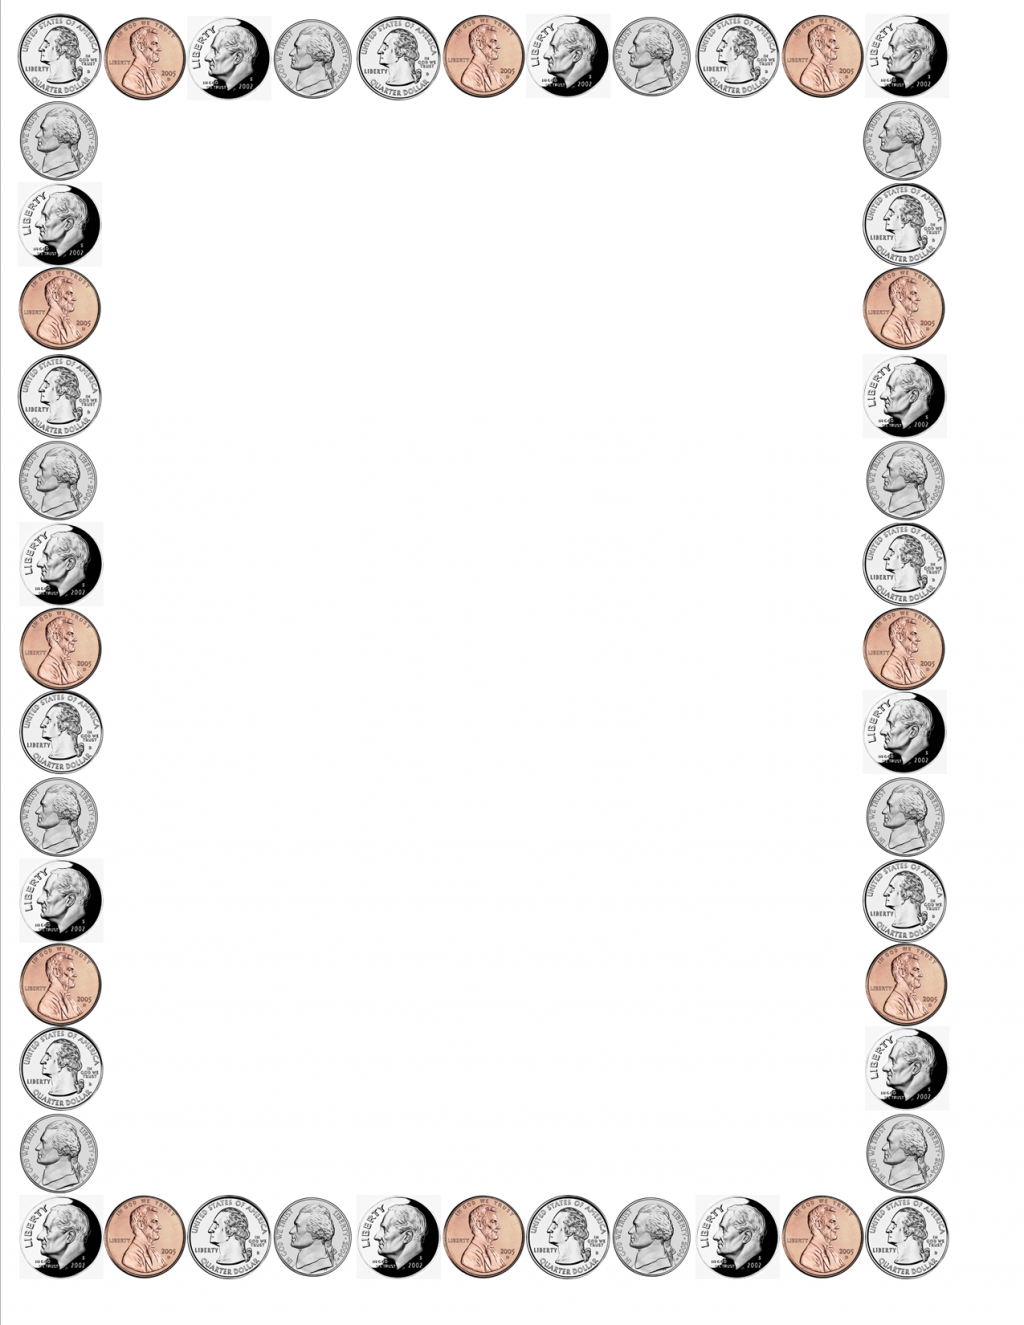 Coin Border Clipart - Coin Border, Transparent background PNG HD thumbnail